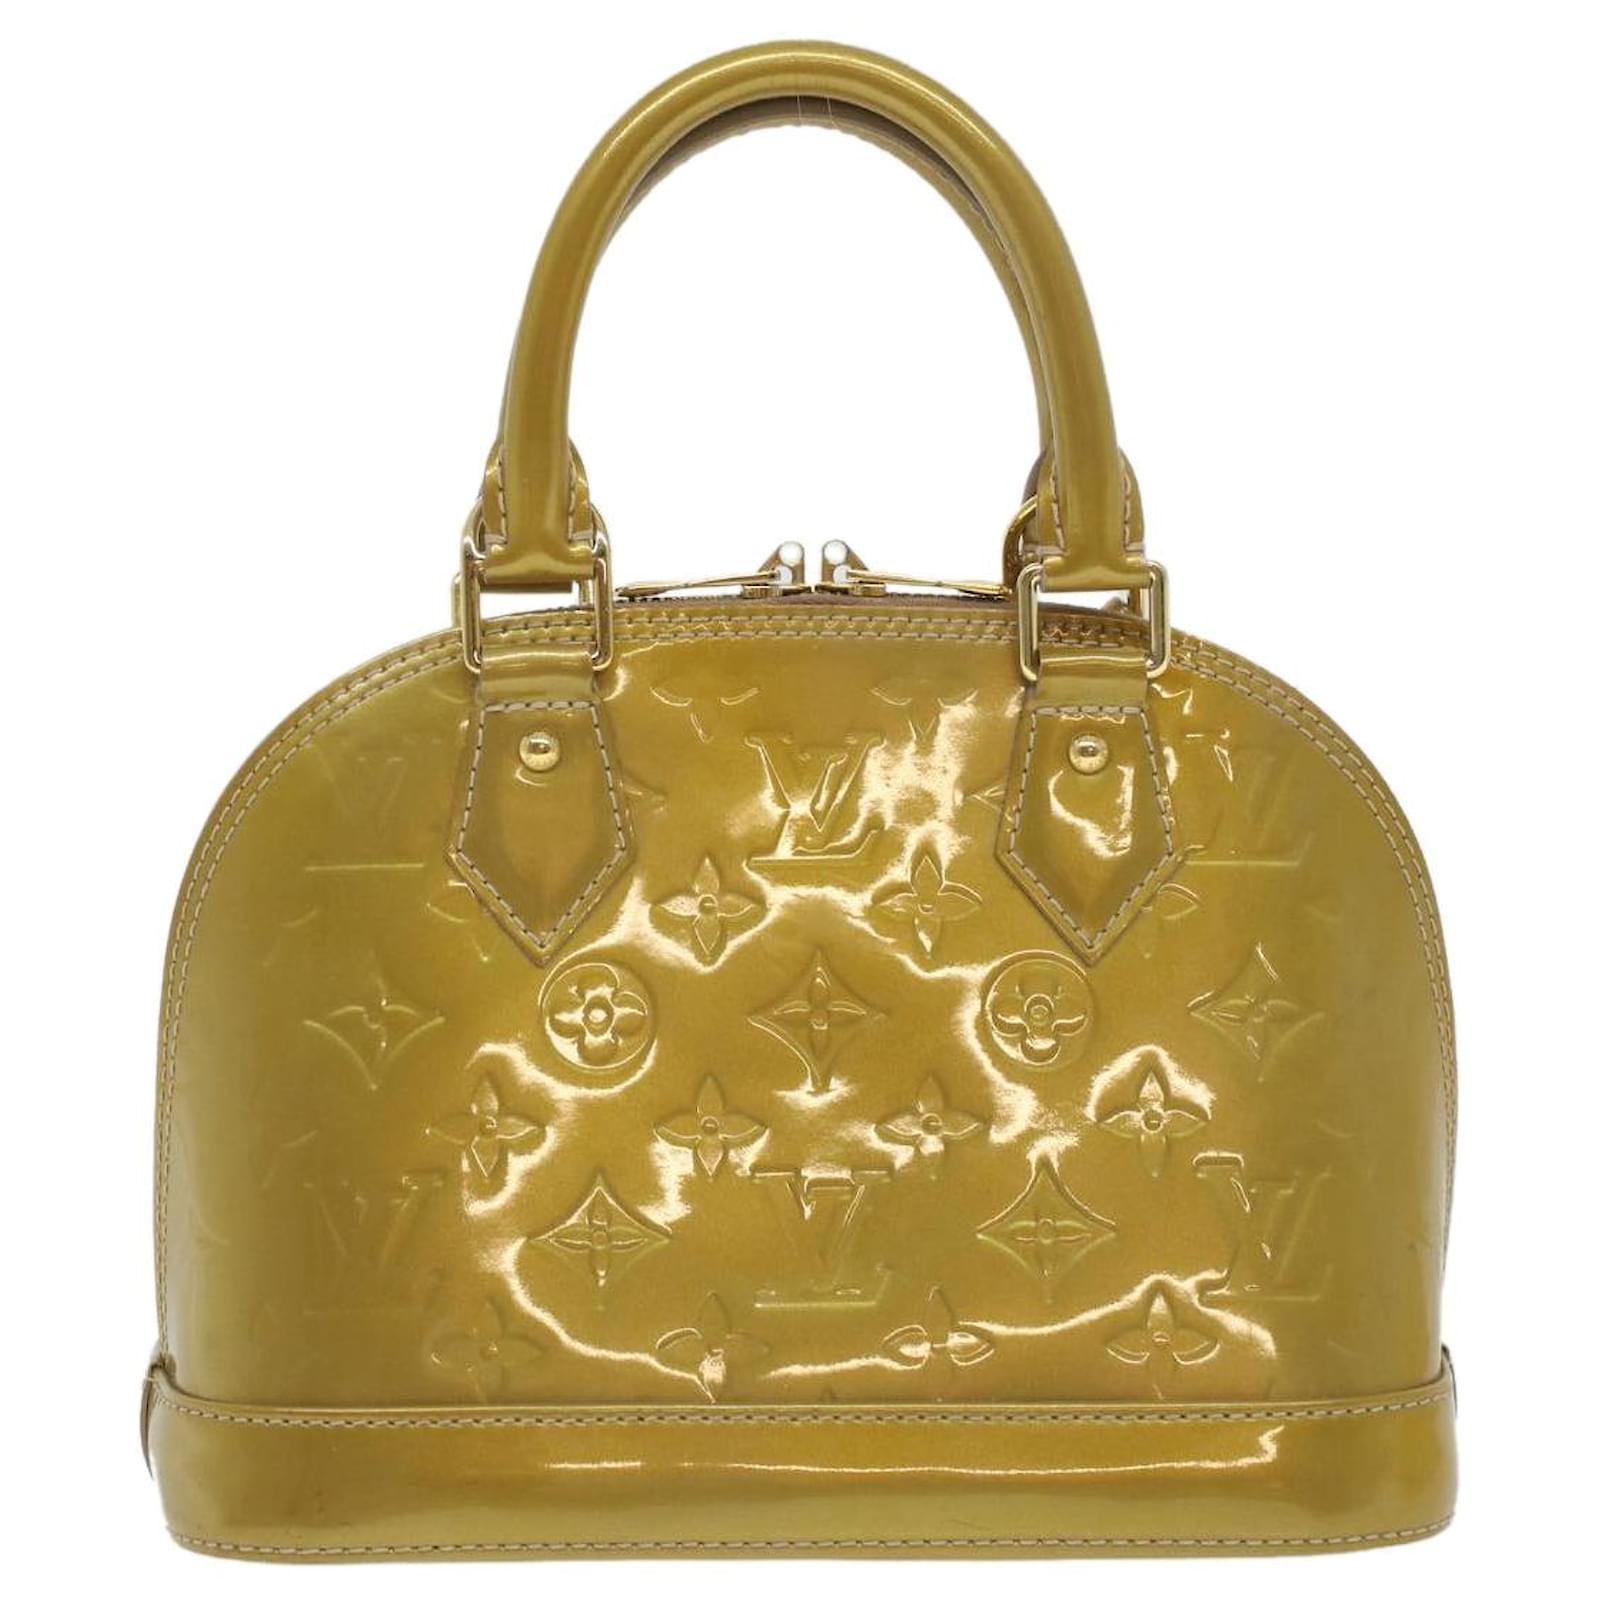 Louis Vuitton Alma BB Patent Leather Green handbag - jewelry - by